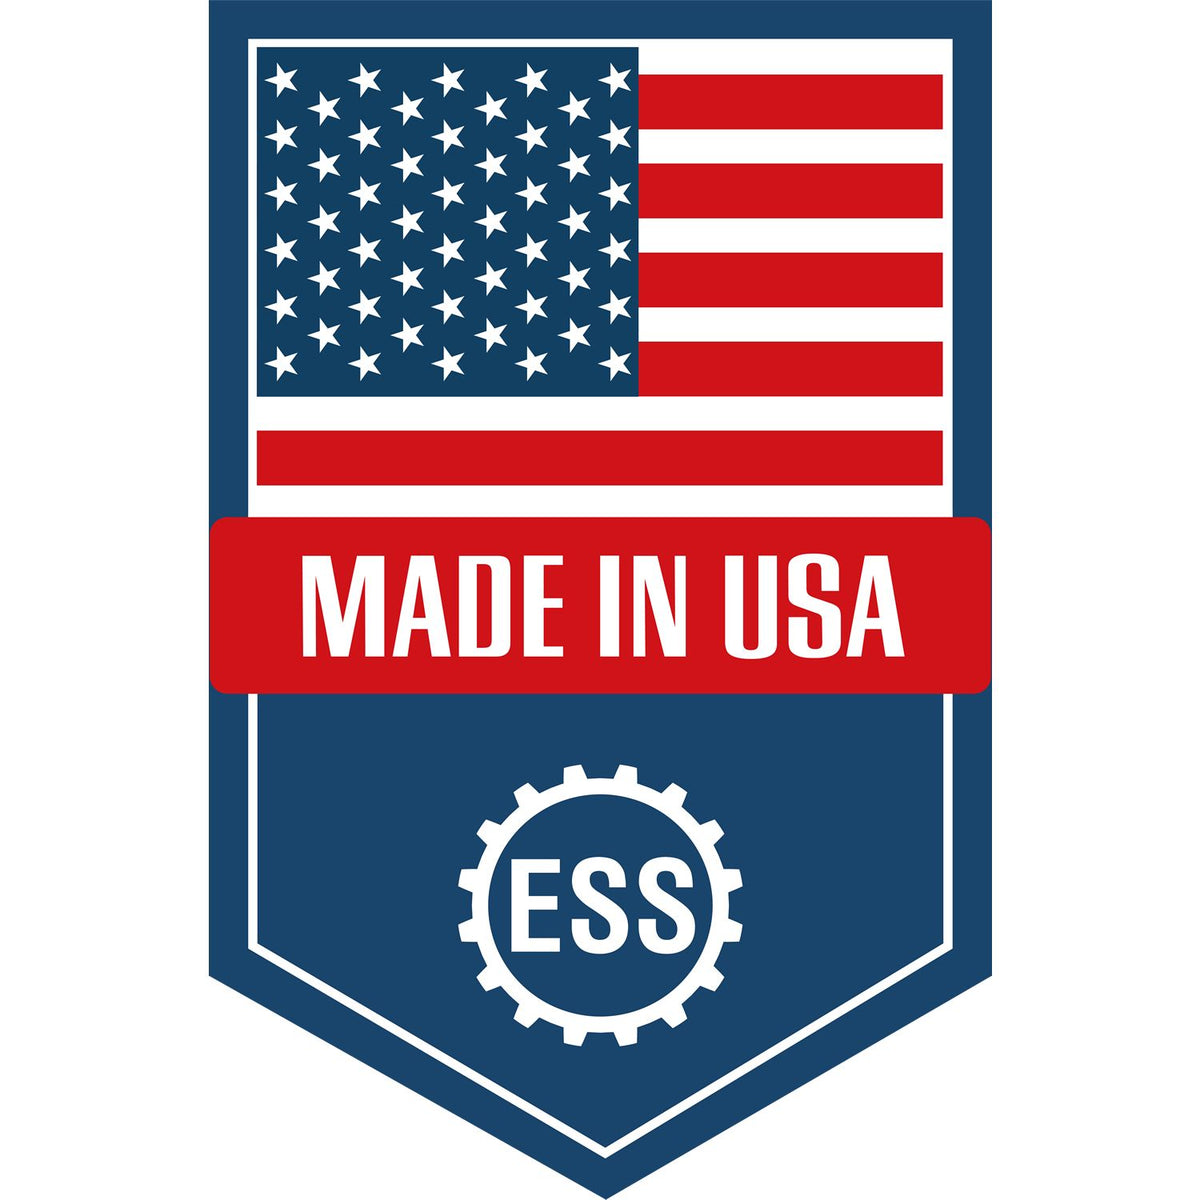 An icon or graphic with an american flag and text reading Made in USA for the State of North Dakota Extended Long Reach Geologist Seal